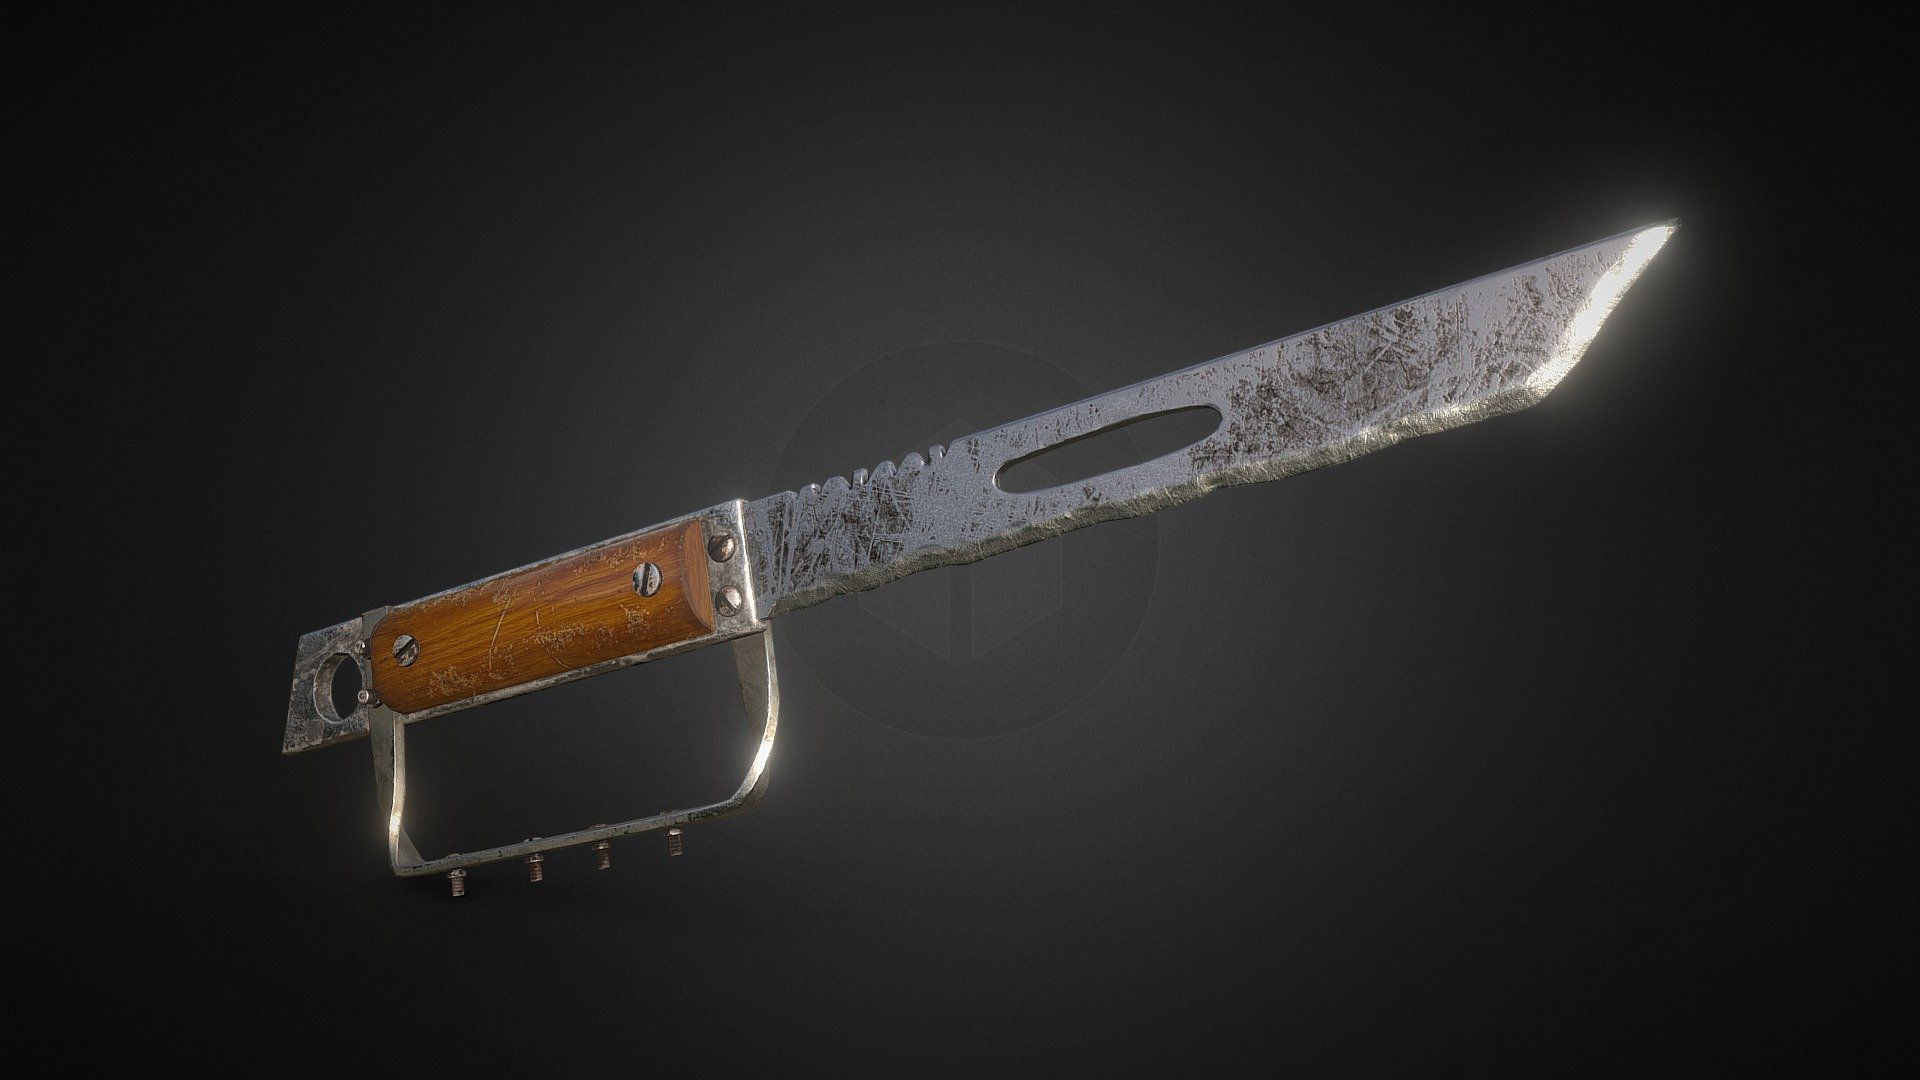 To create this dagger, I used software:
Blender
Zbrush
Marmoset Toolbag
Substance painter - Metro Dagger - 3D model by Hexgray 3d model